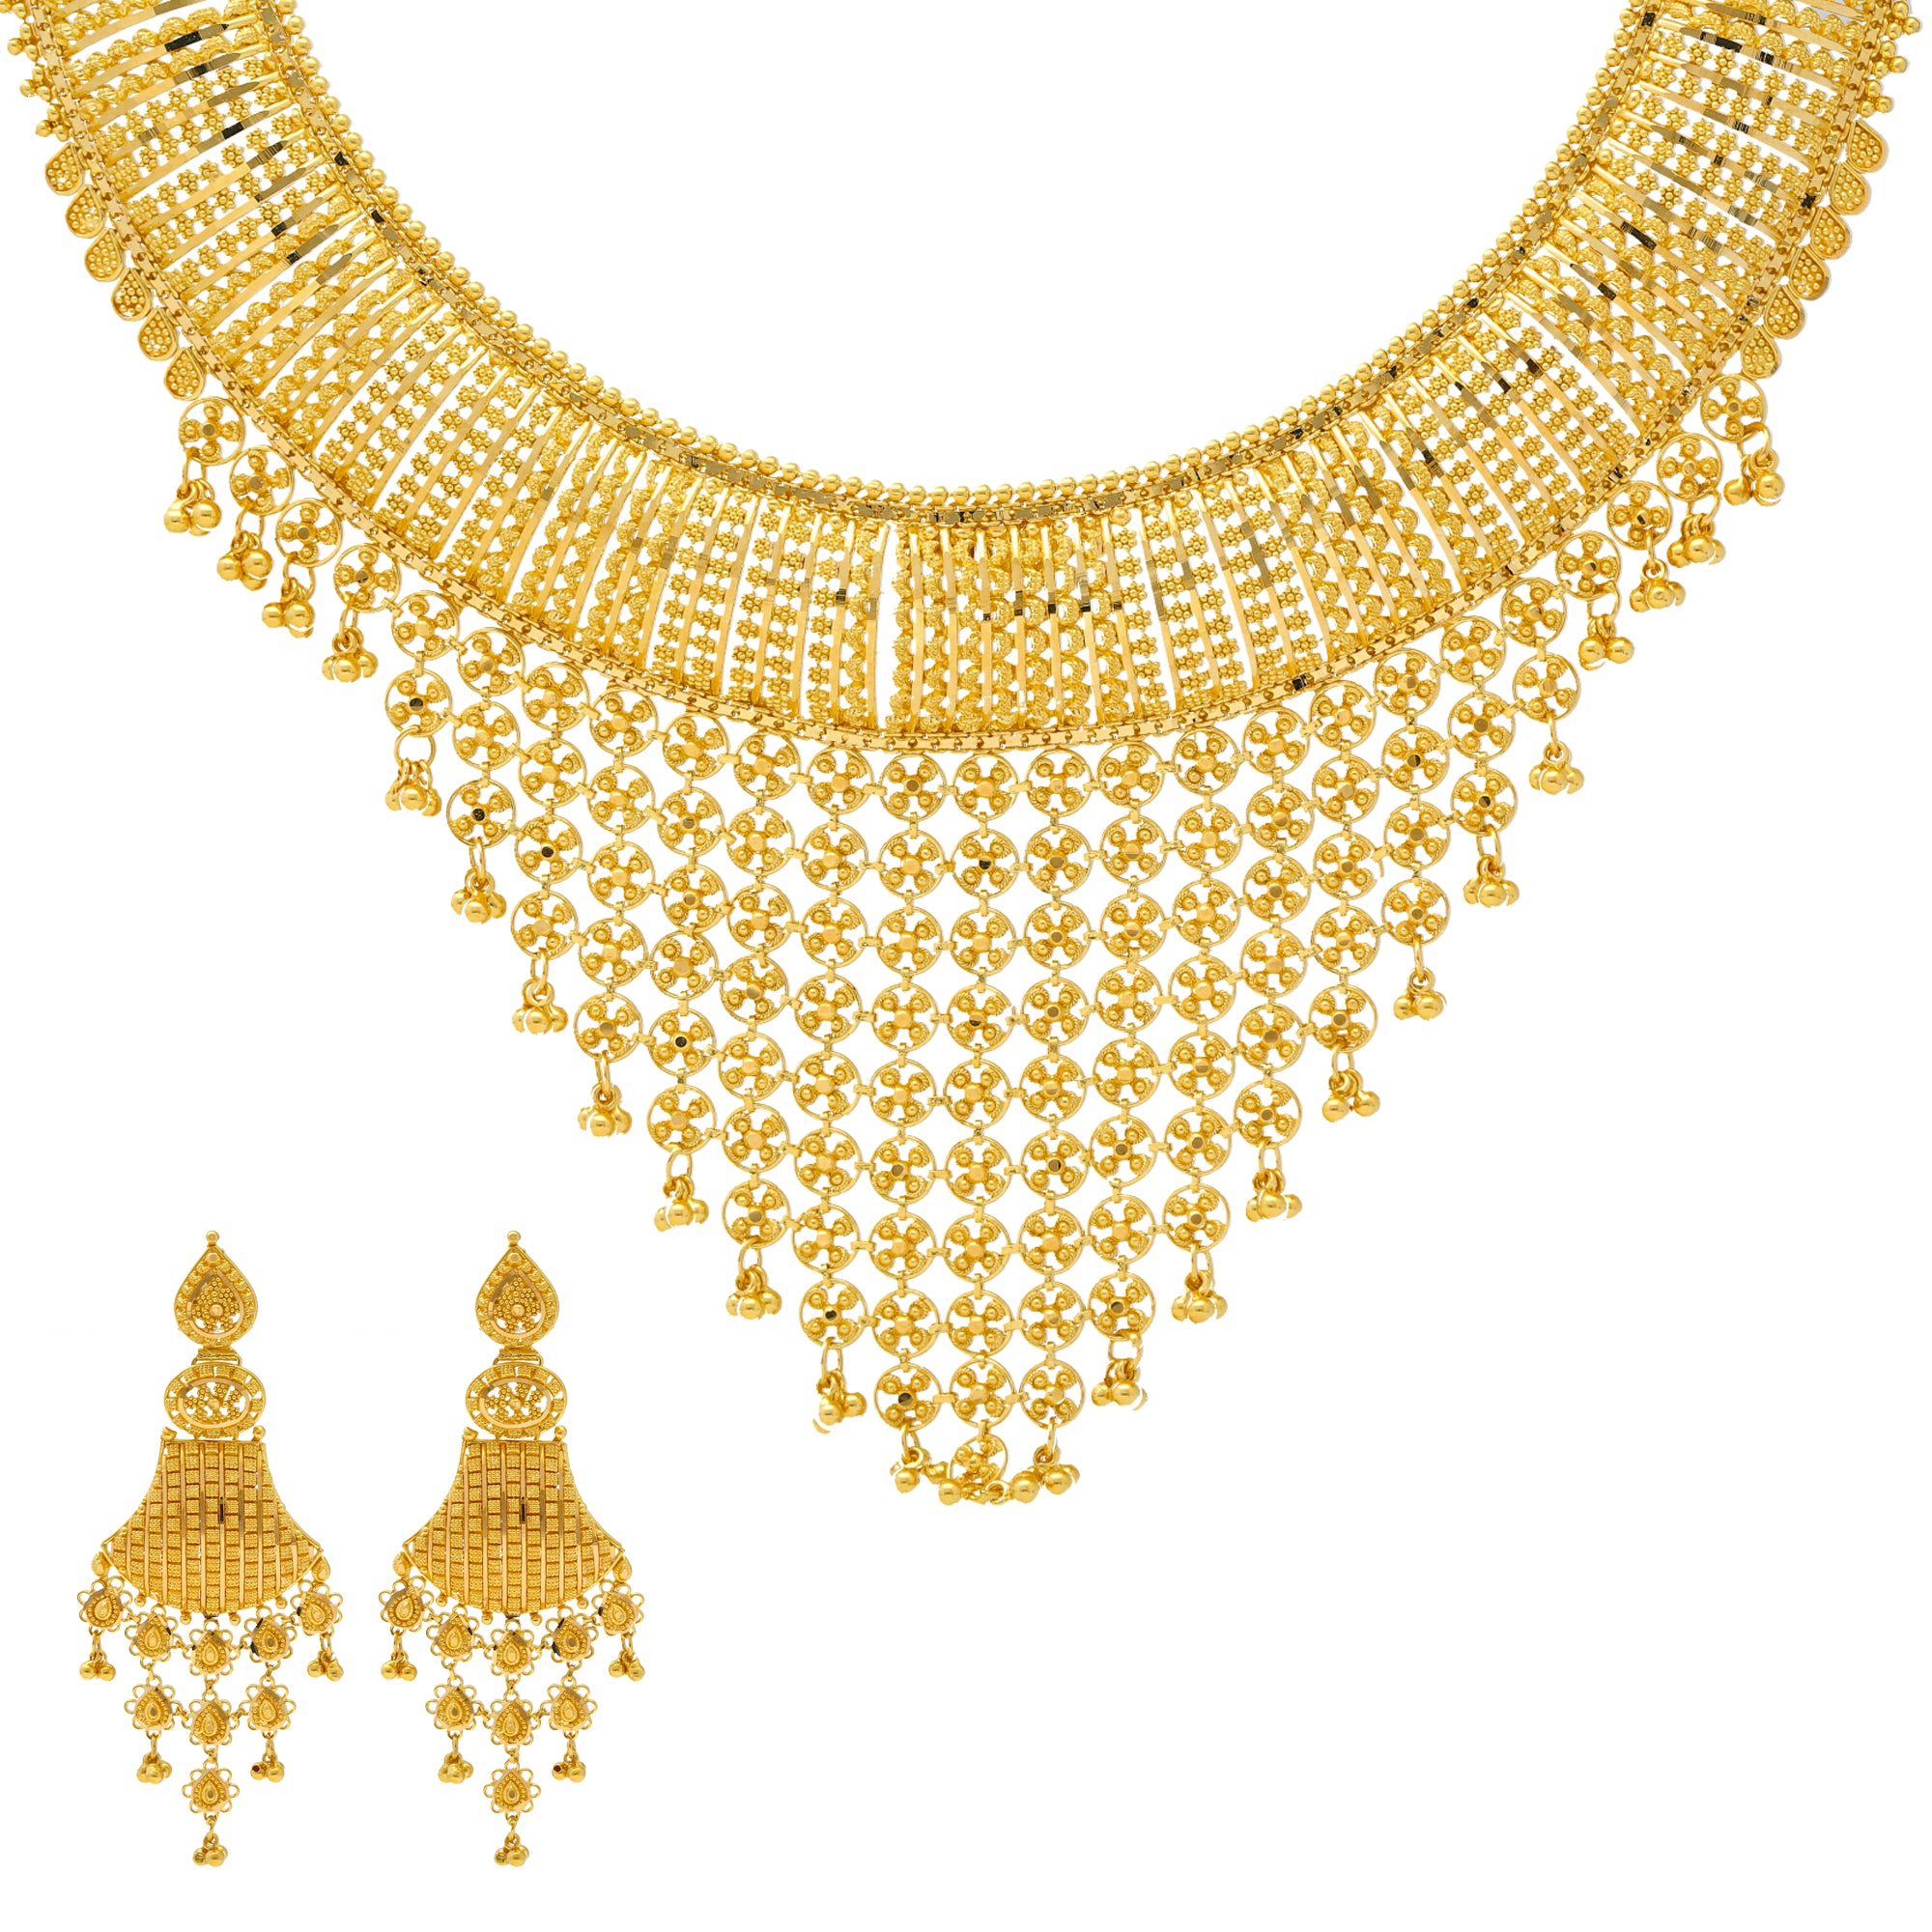 Traditional South Indian Gold Platted Temple Laxmi Design Semi Bridal Jewellery  Set With 1 Short Necklace Set 1 Long Necklace Set 1 Kamarband (Hip Belt) 1  Maangtika And Pair Of Earrings Along With Golden Pearls.